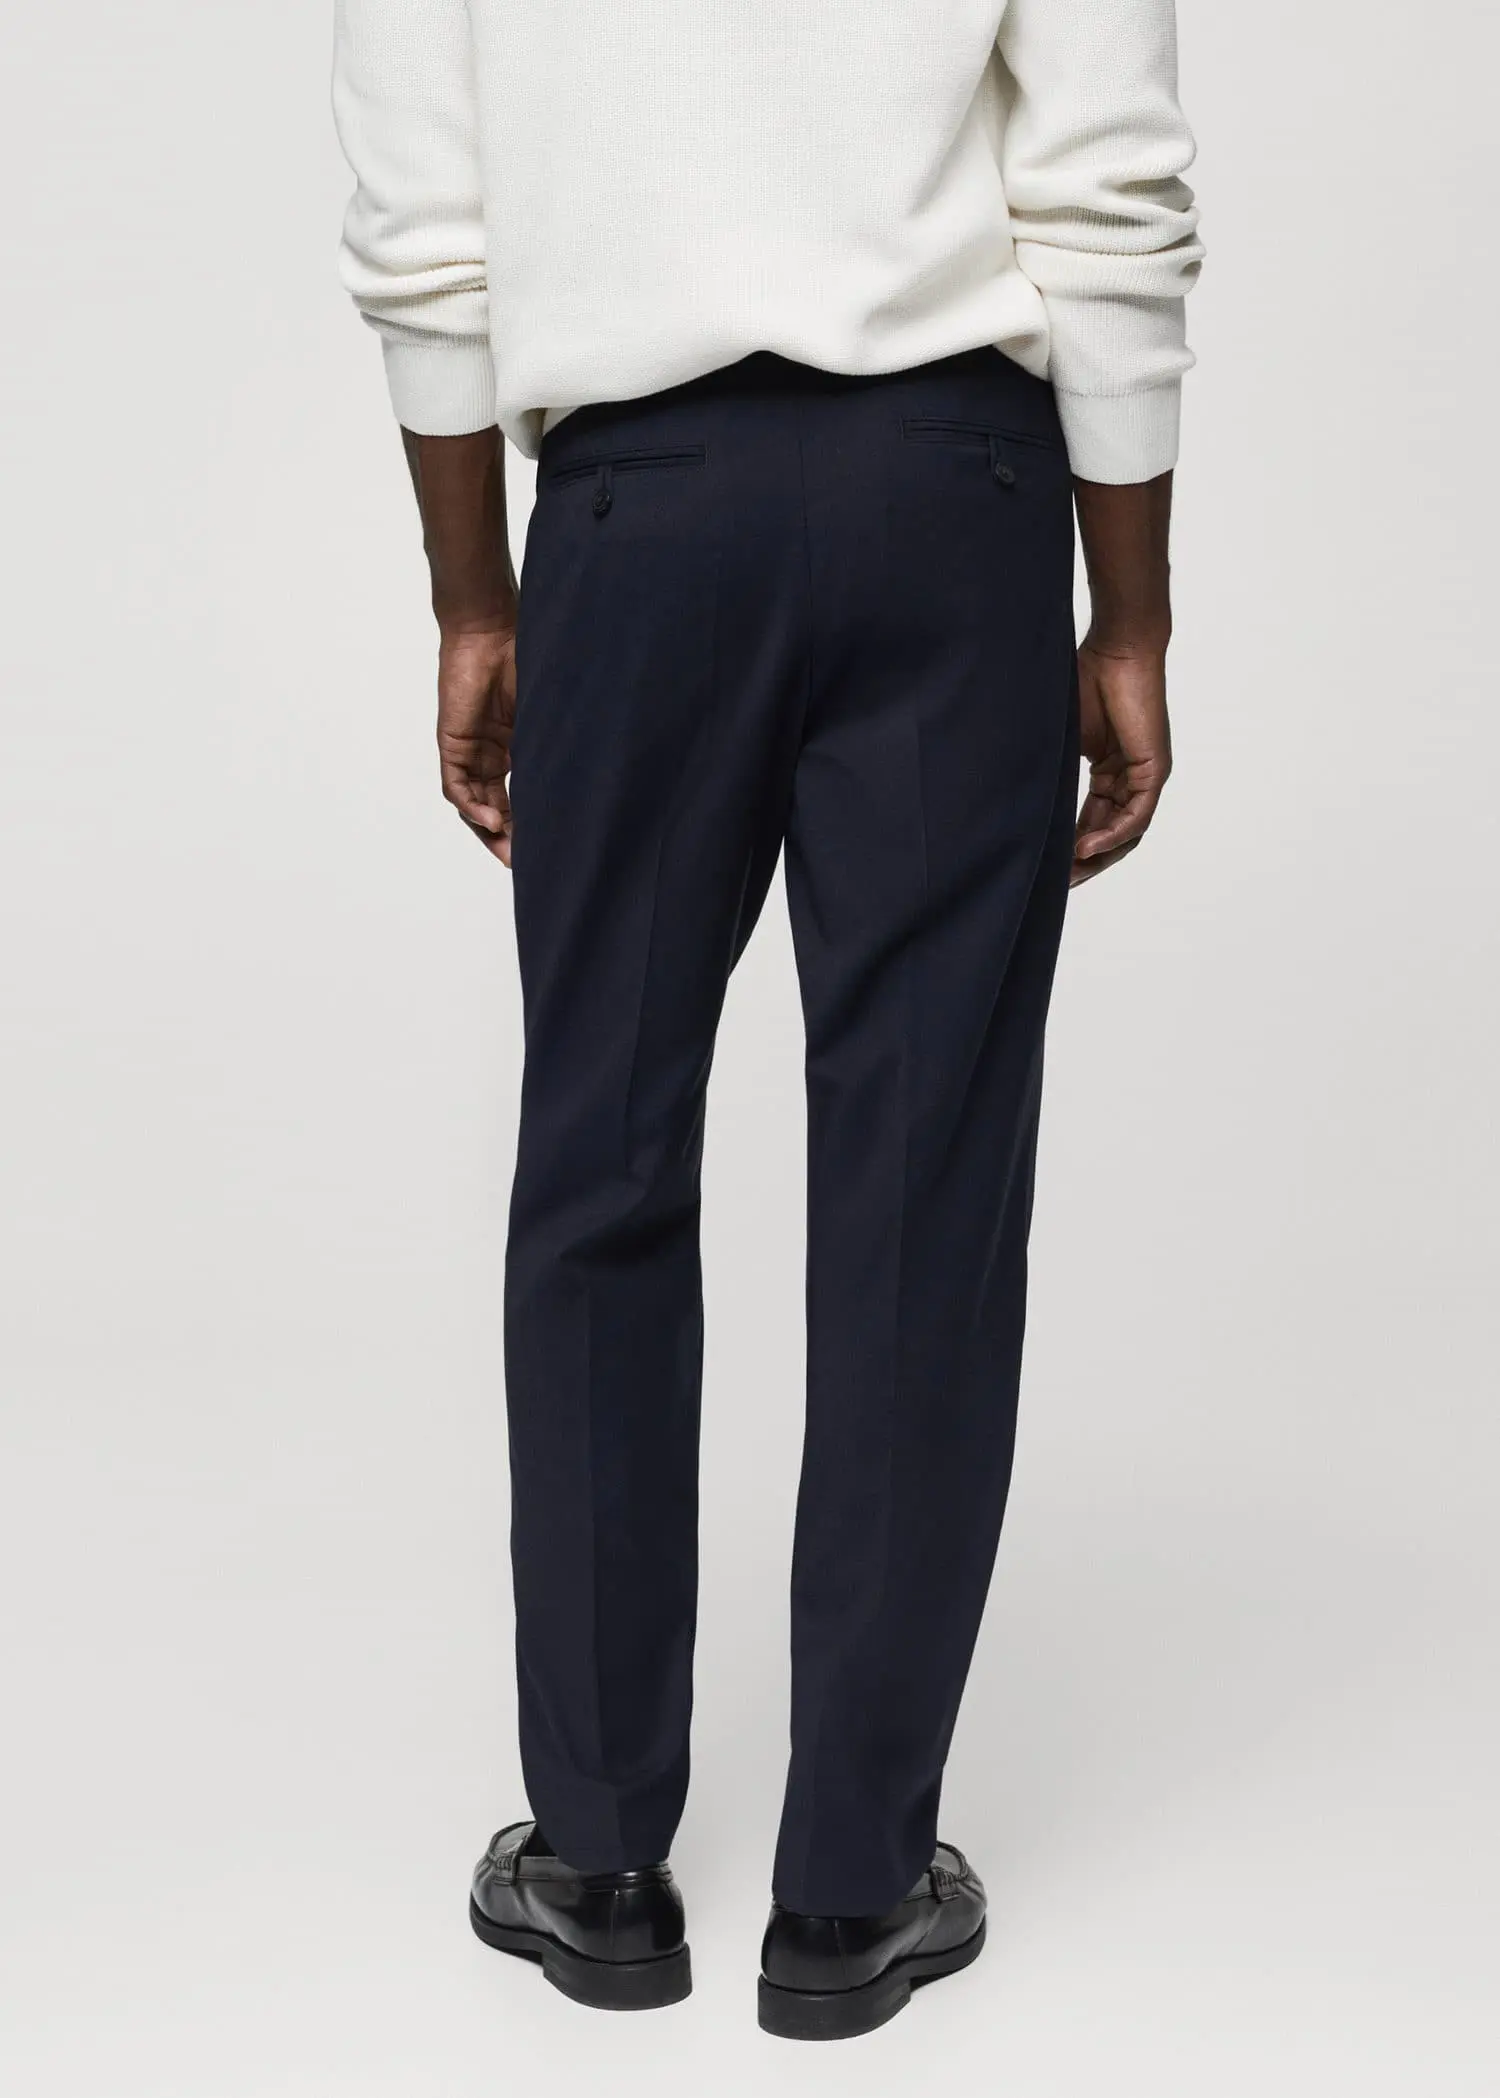 Mango Cold wool trousers with pleat detail. 3